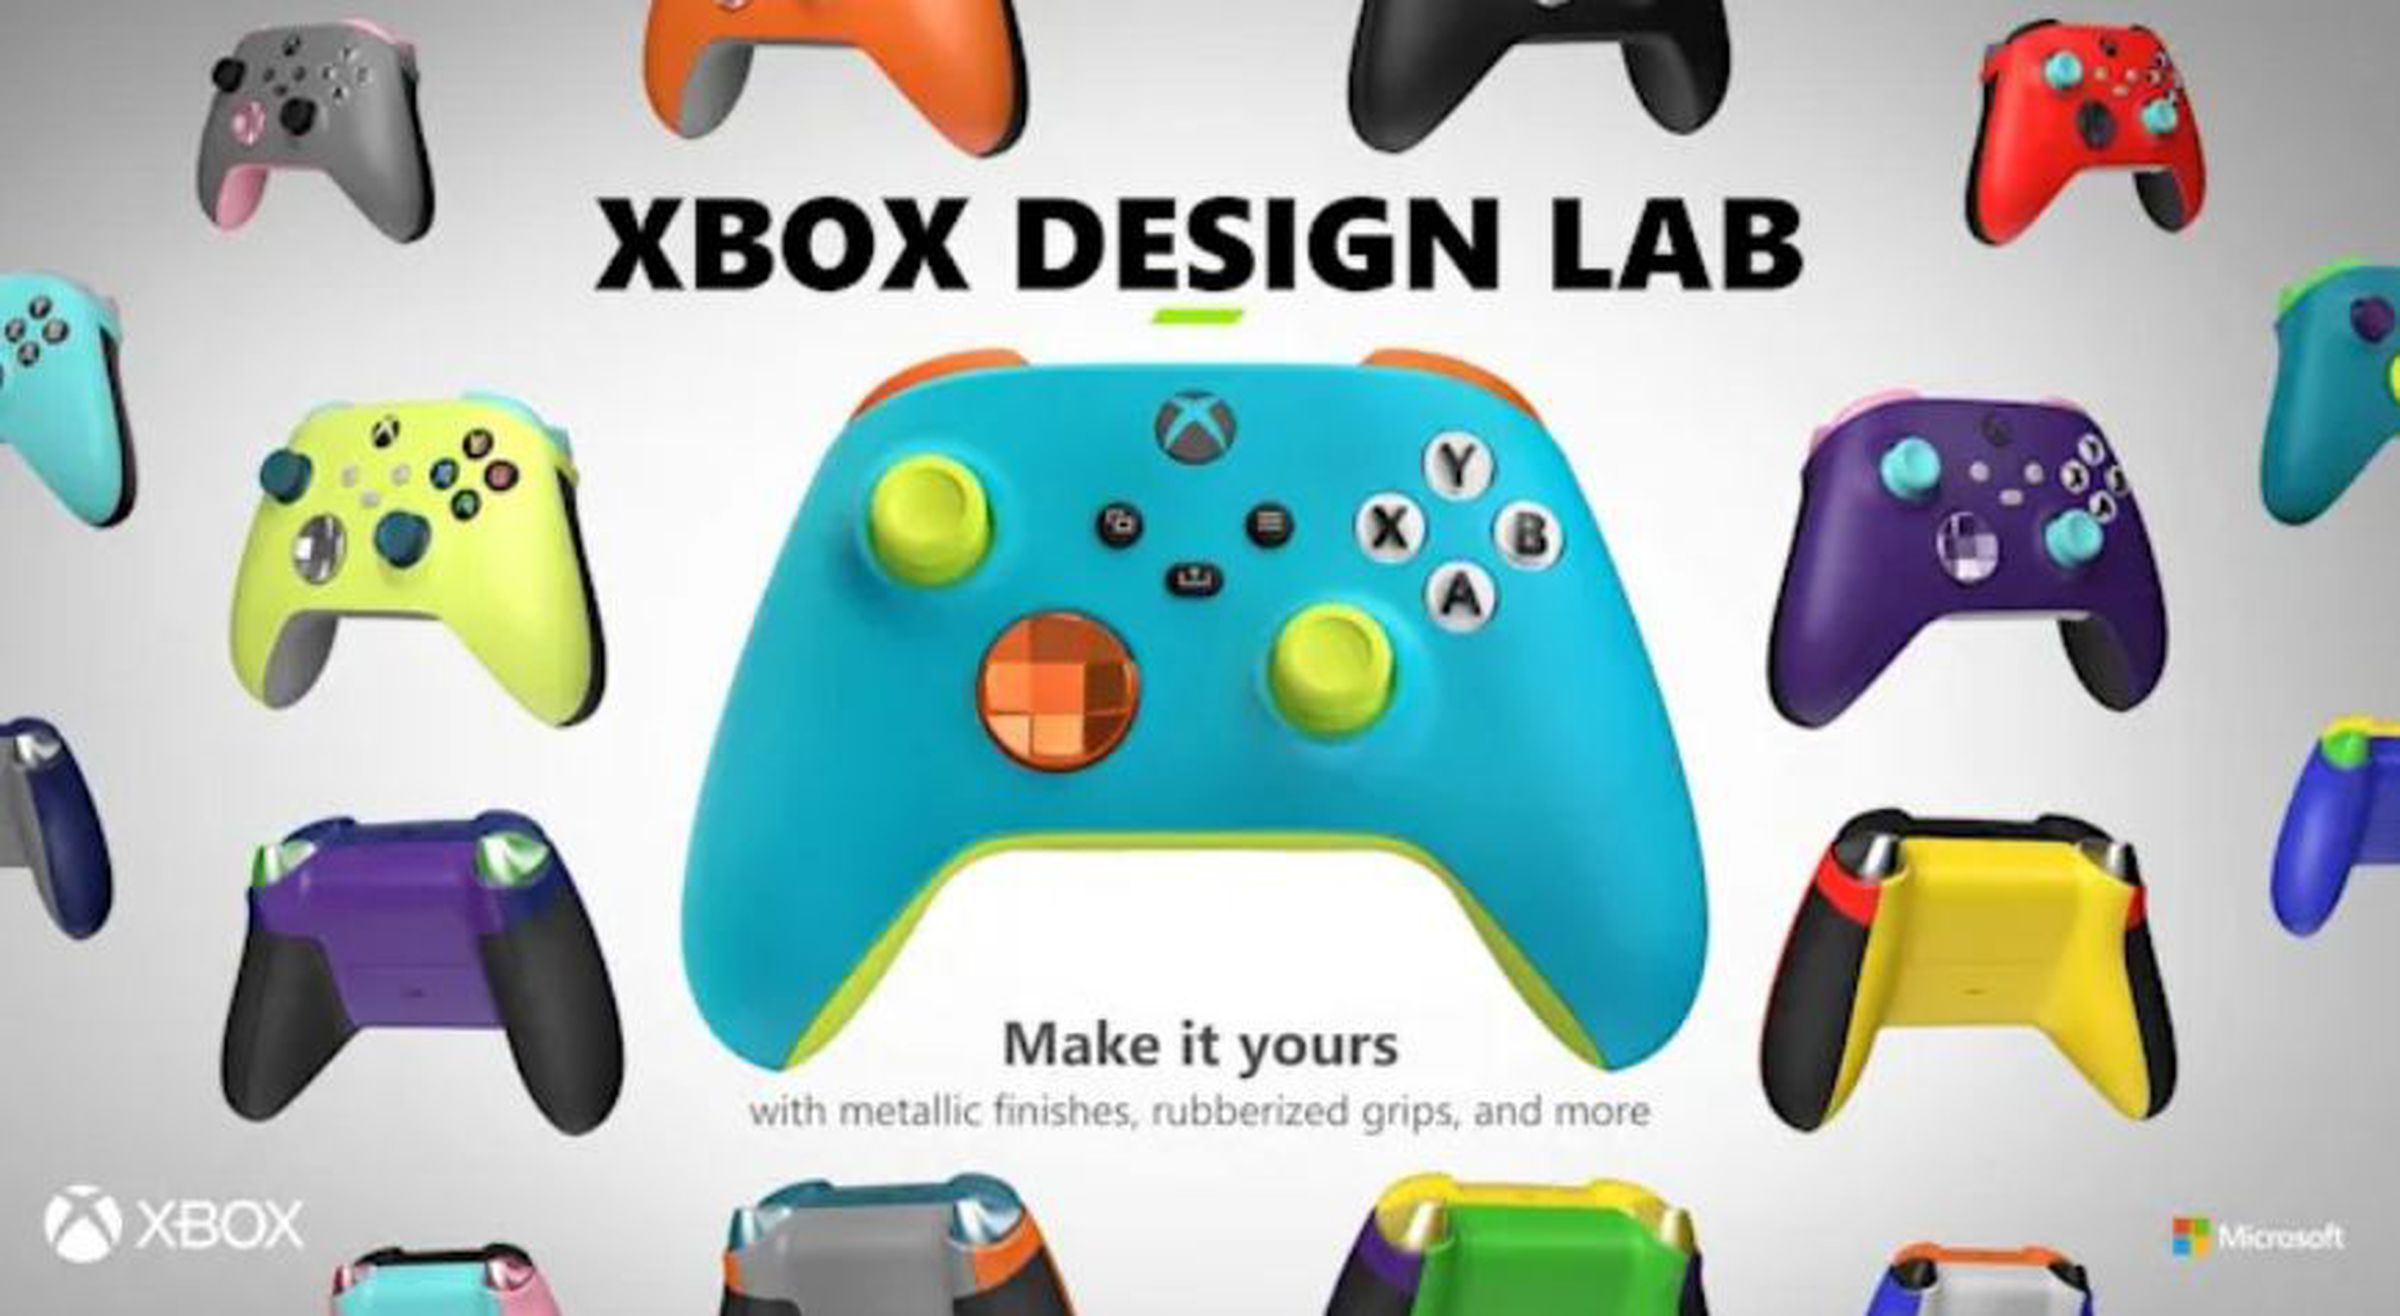 The Xbox Design Lab already has millions of different combinations.